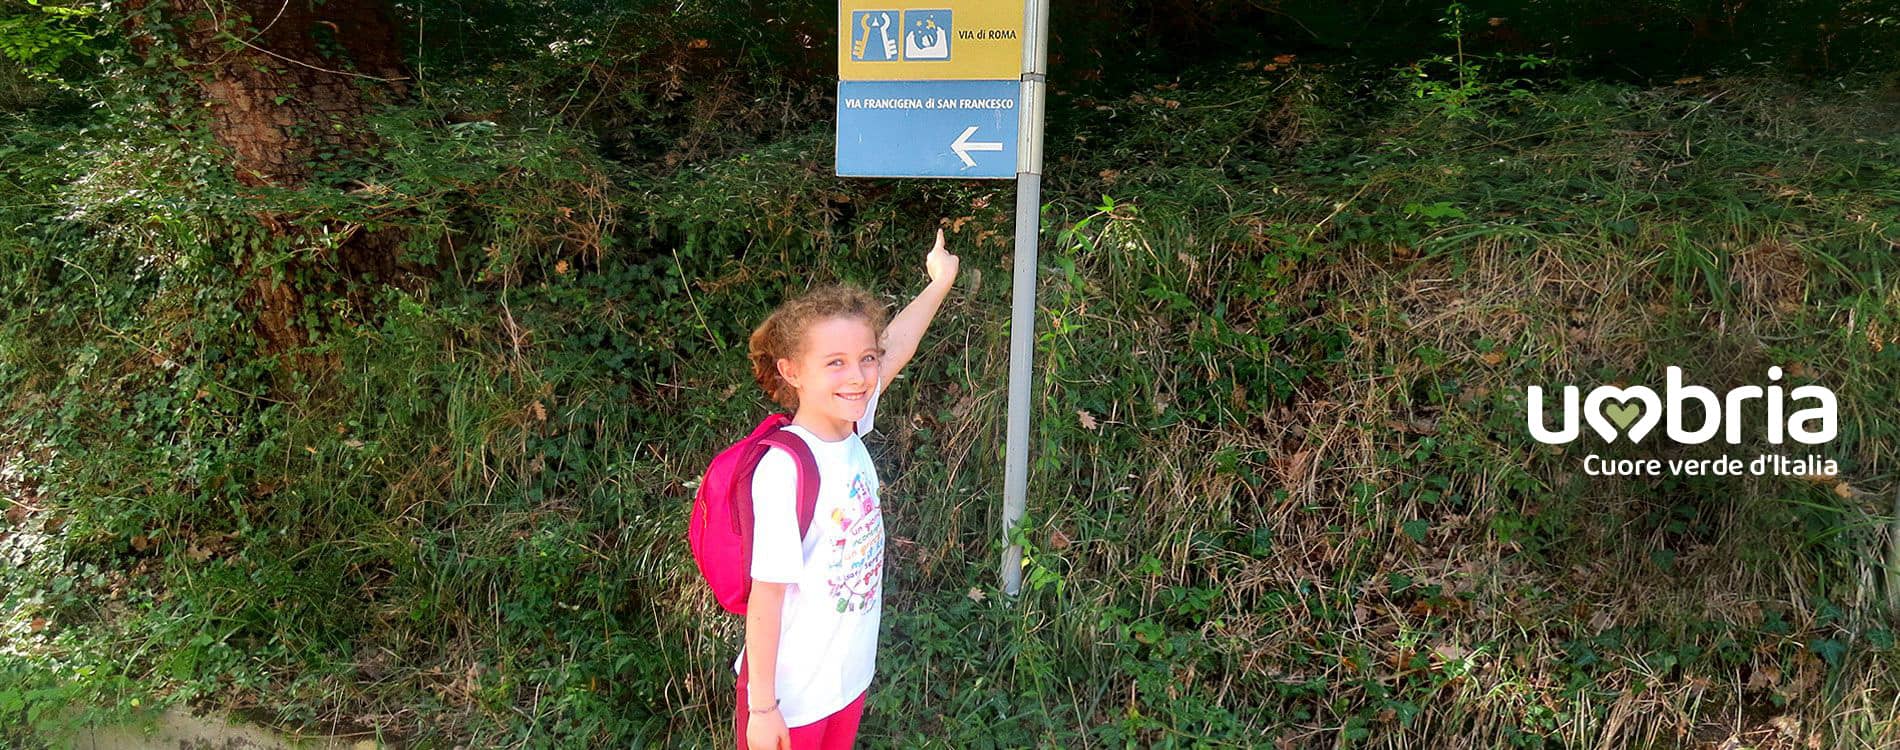 Road signs along the St Francis' Way to Assisi are easy to follow